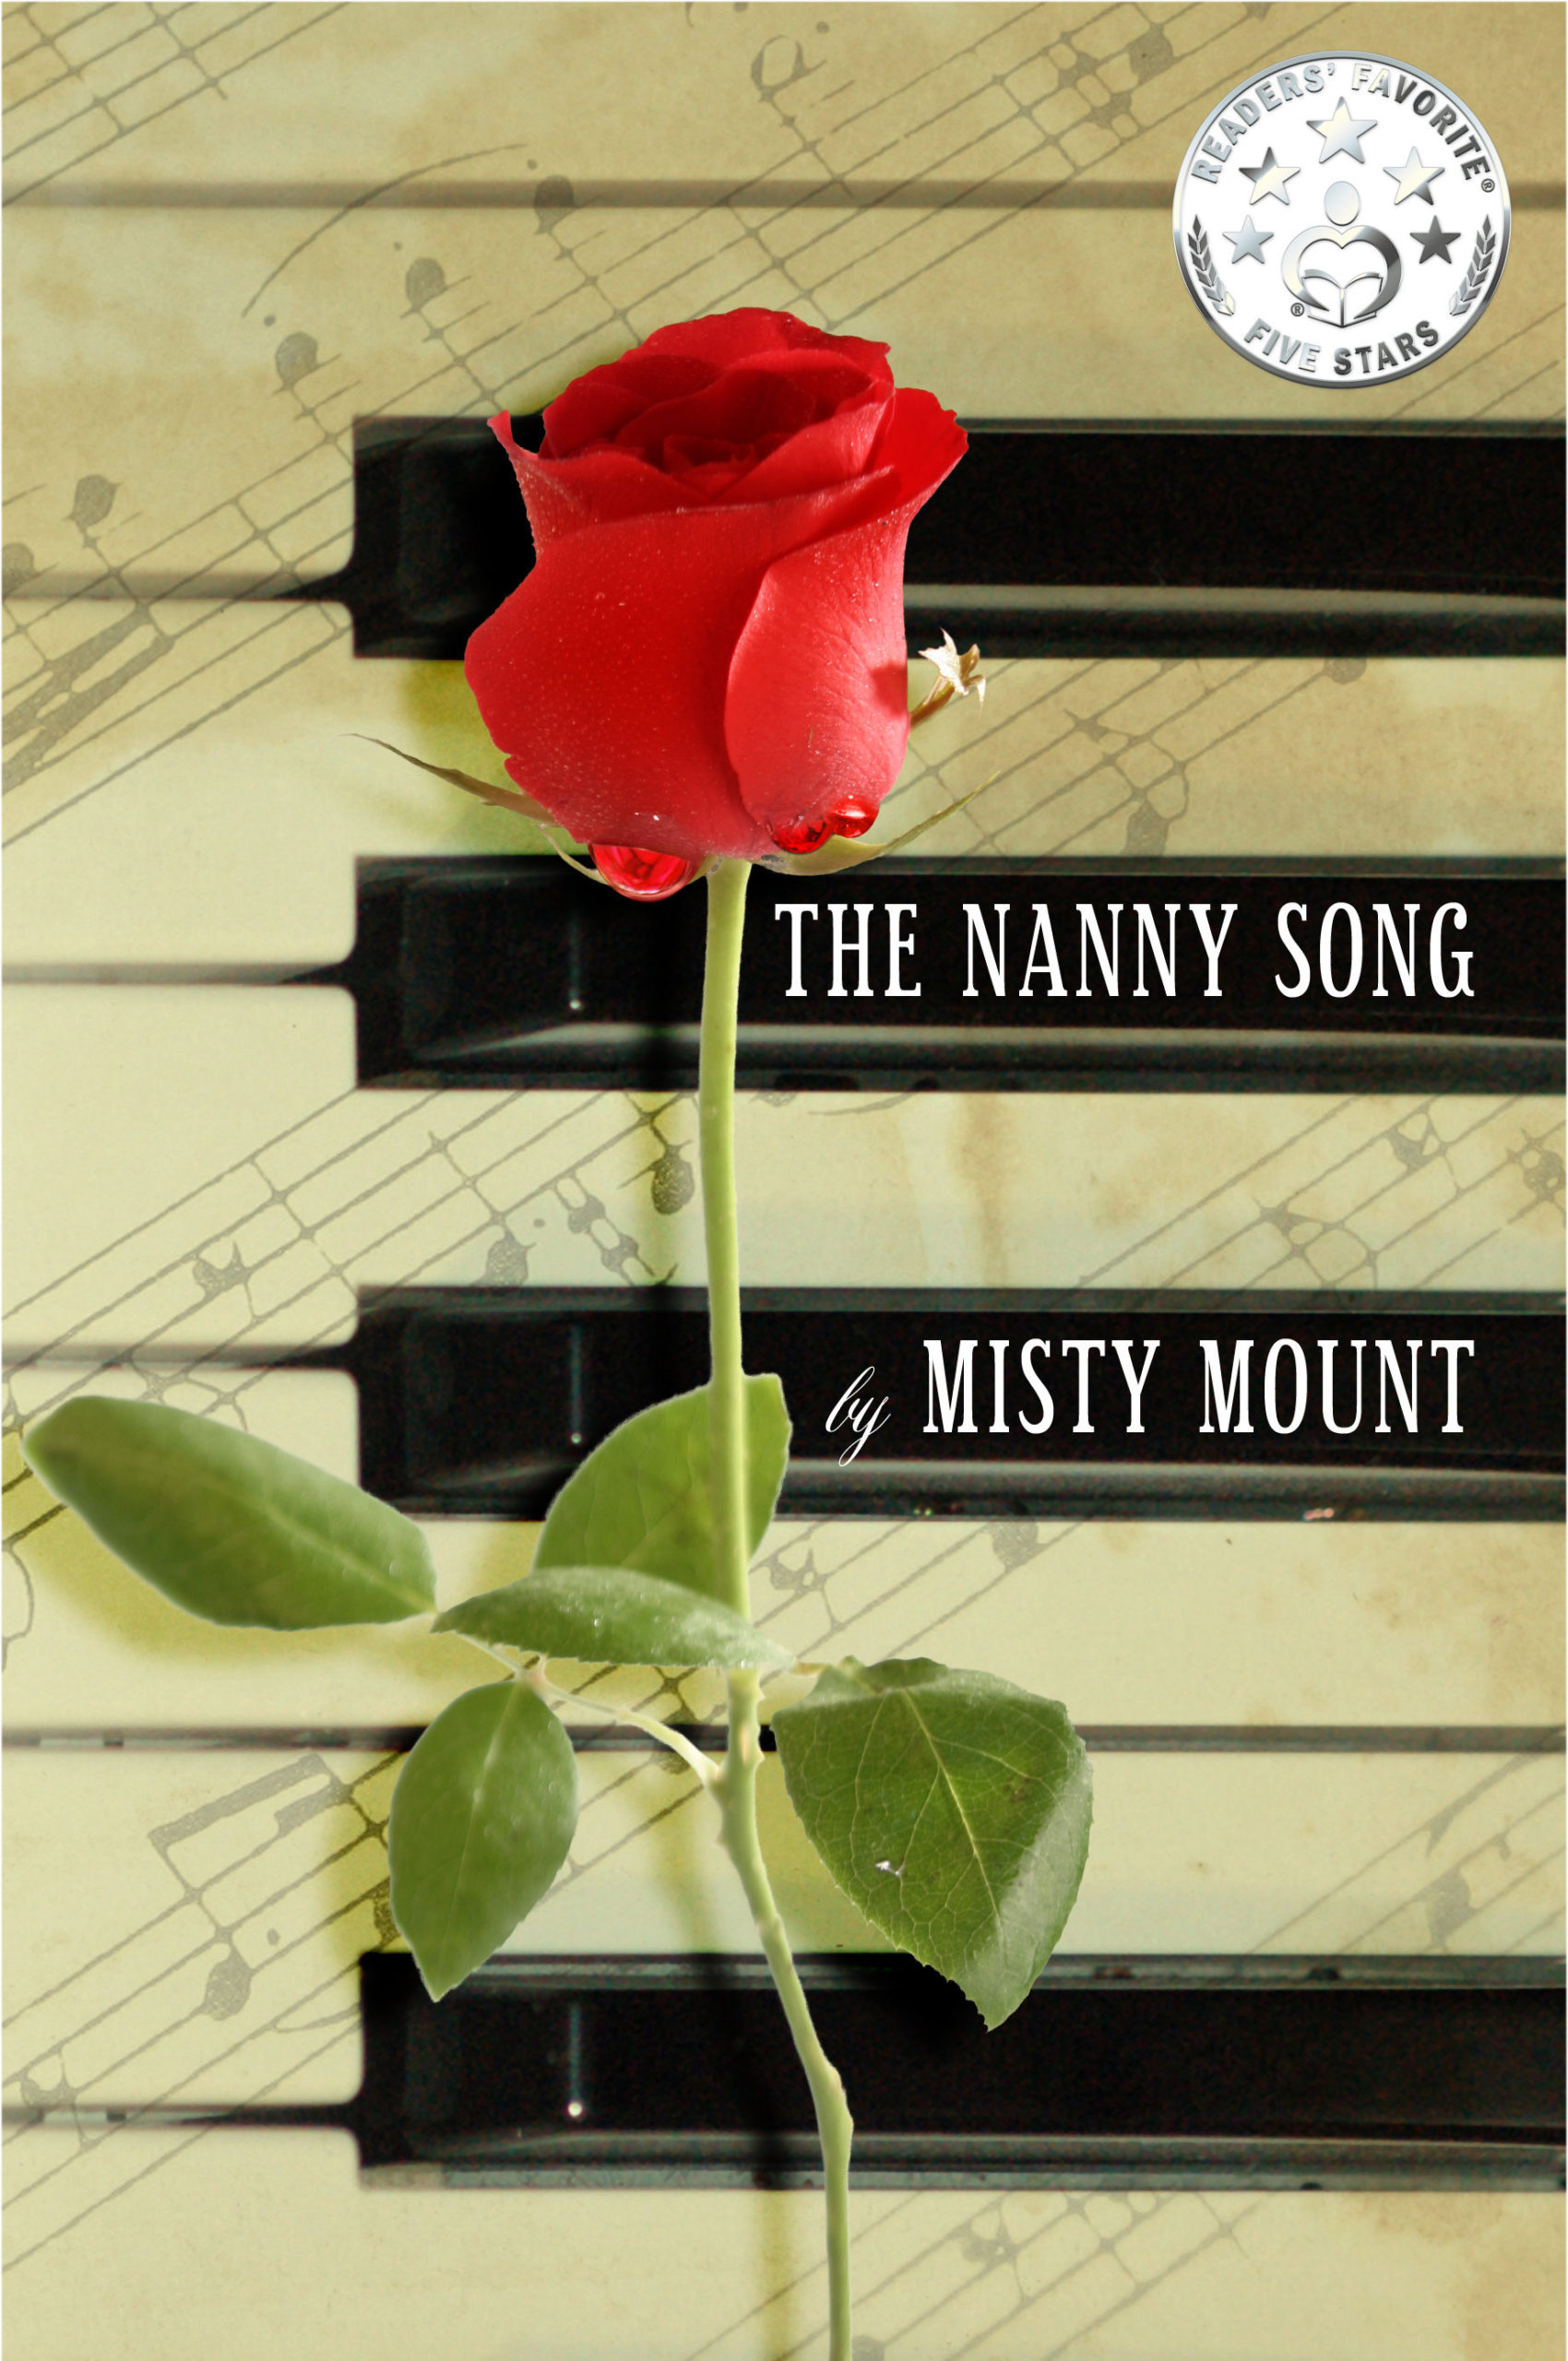 The Nanny Song by Misty Mount